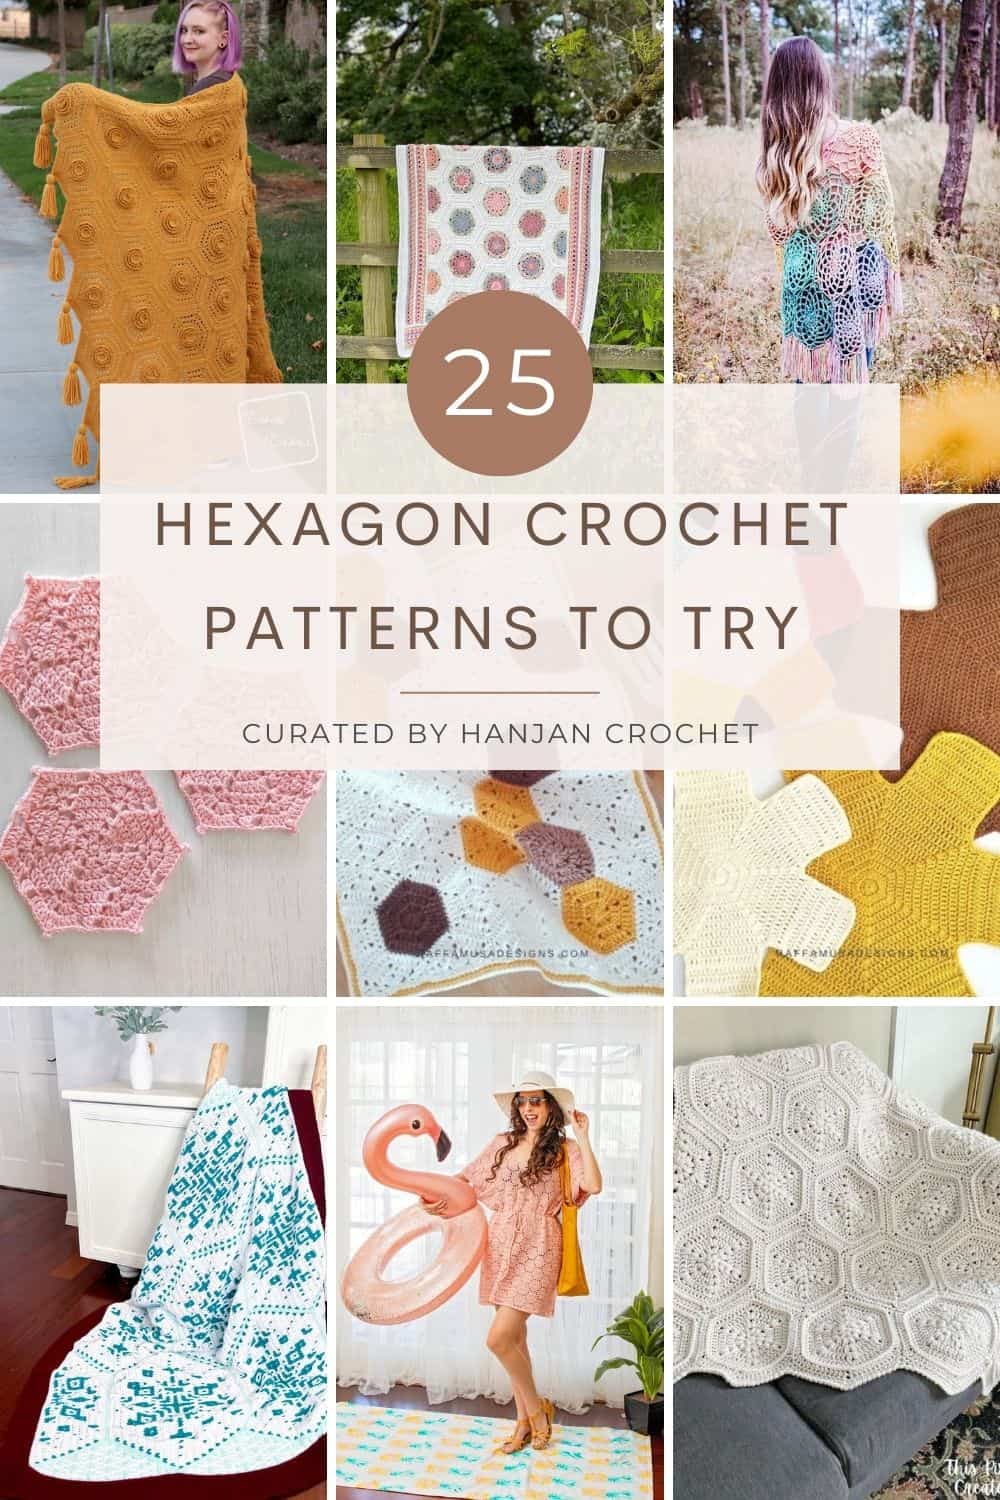 Hexagon Crochet Patterns to Try